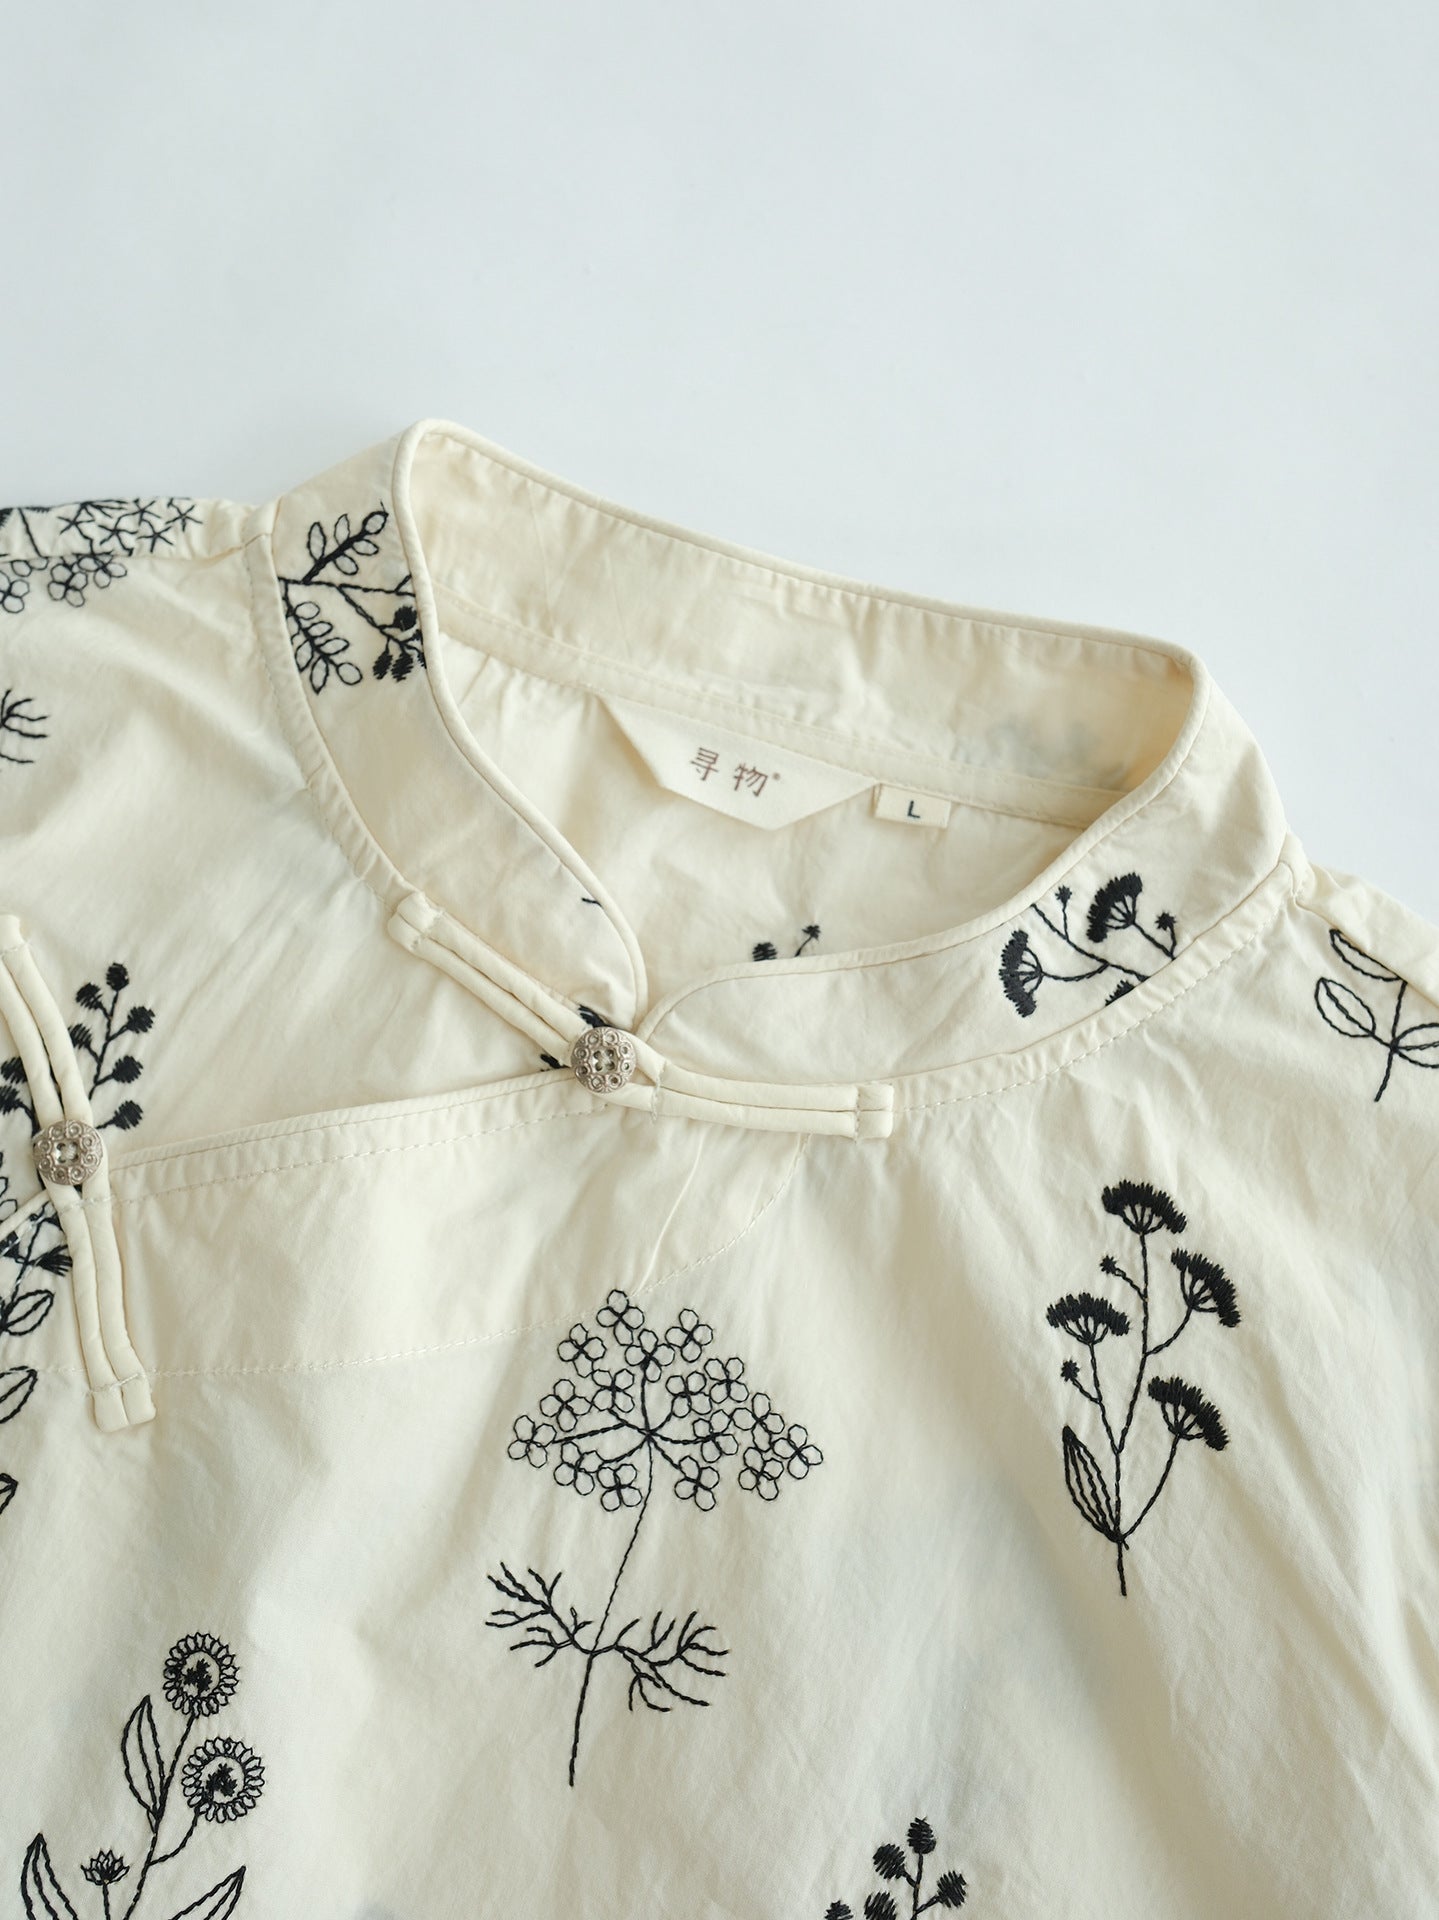 Floral Embroidered Cheongsam Top in Off White